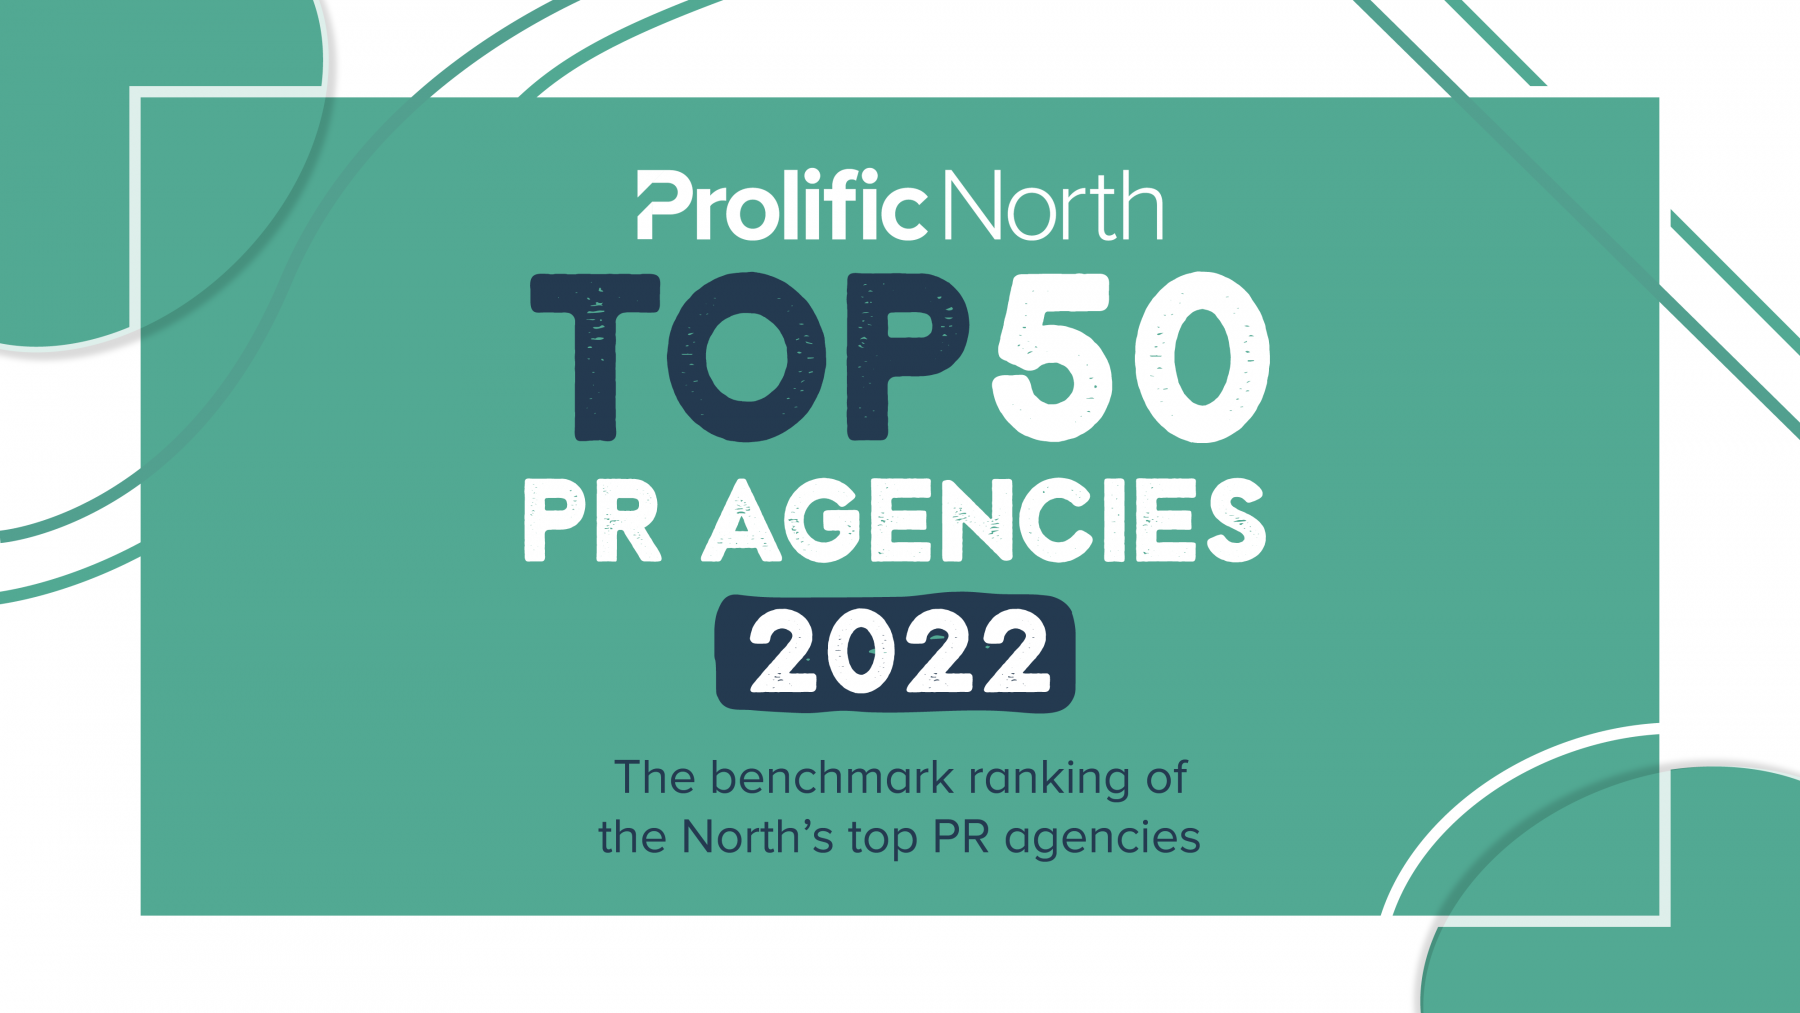 Rodet Uganda Tak Submit your information now for a chance to be featured on the Top 50 PR  Agencies list 2022 Prolific North